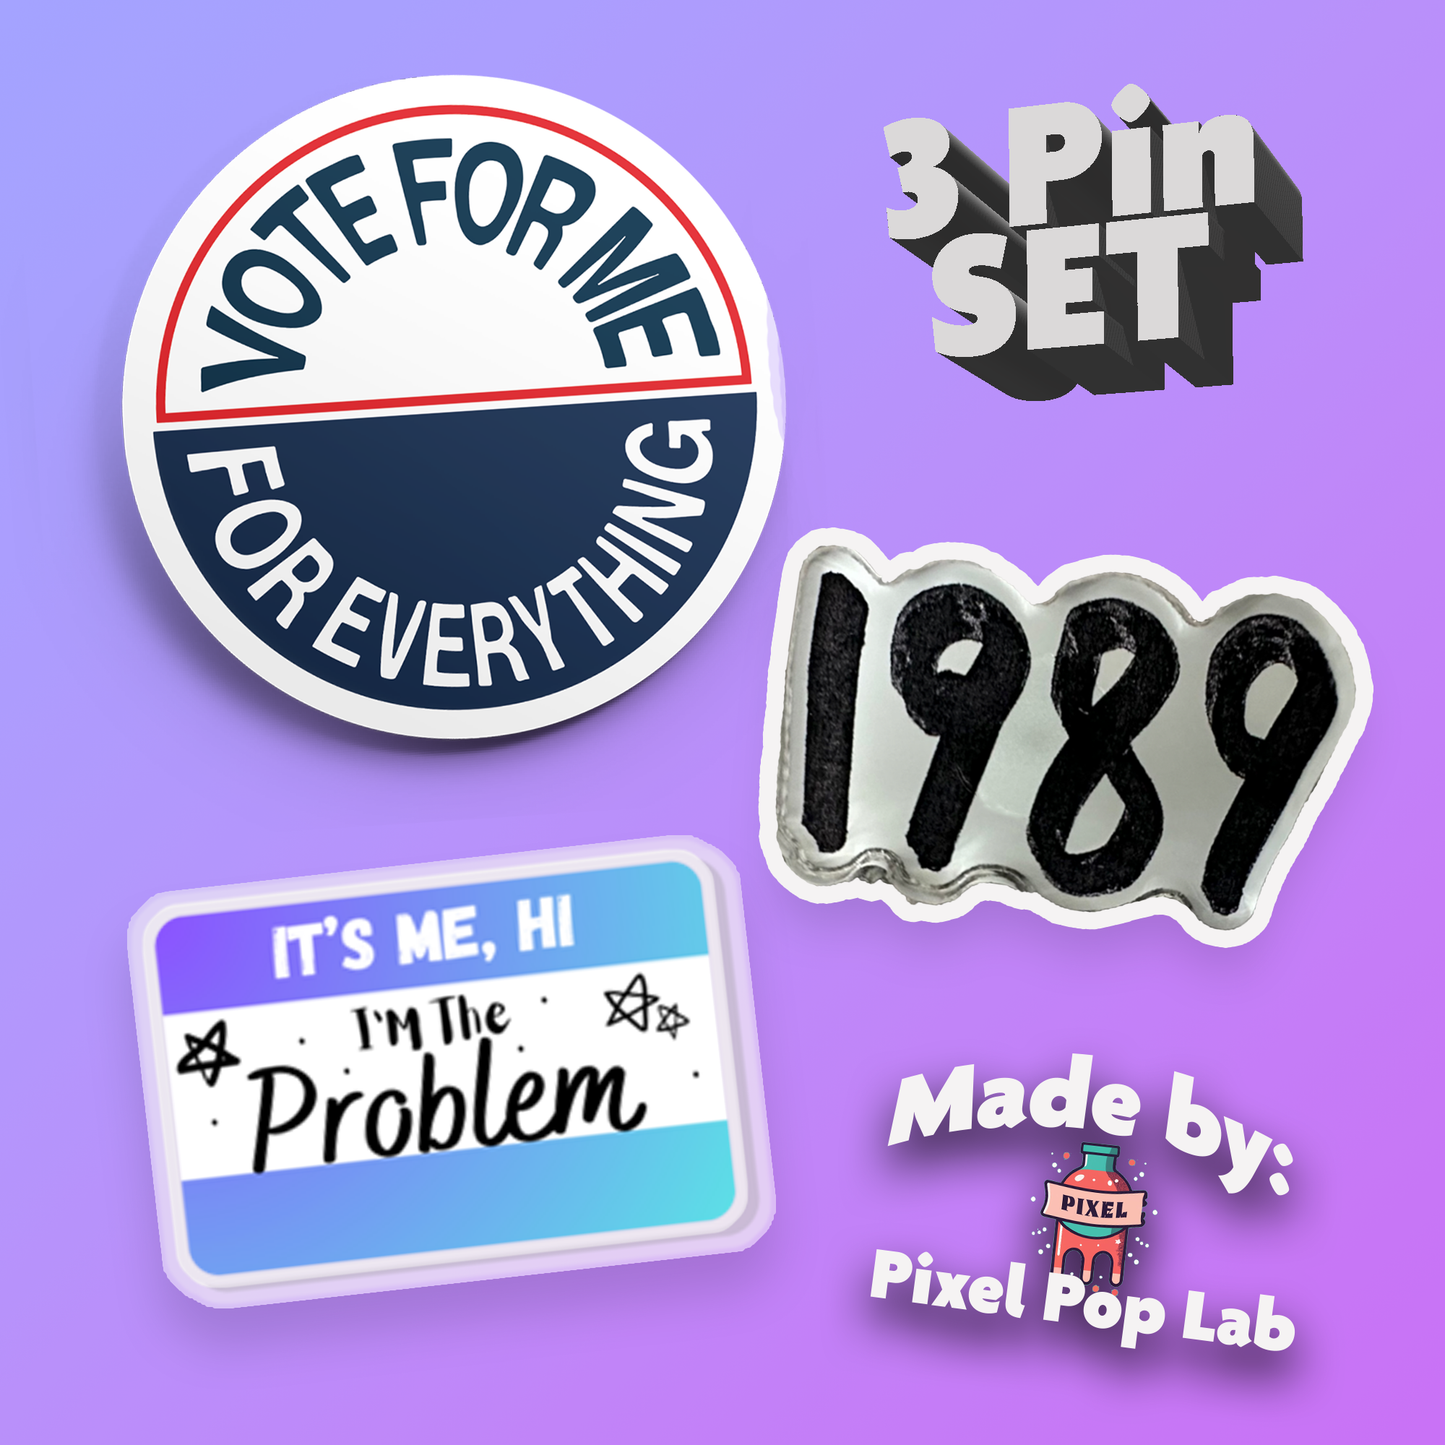 Vote For Me For Everything Pin